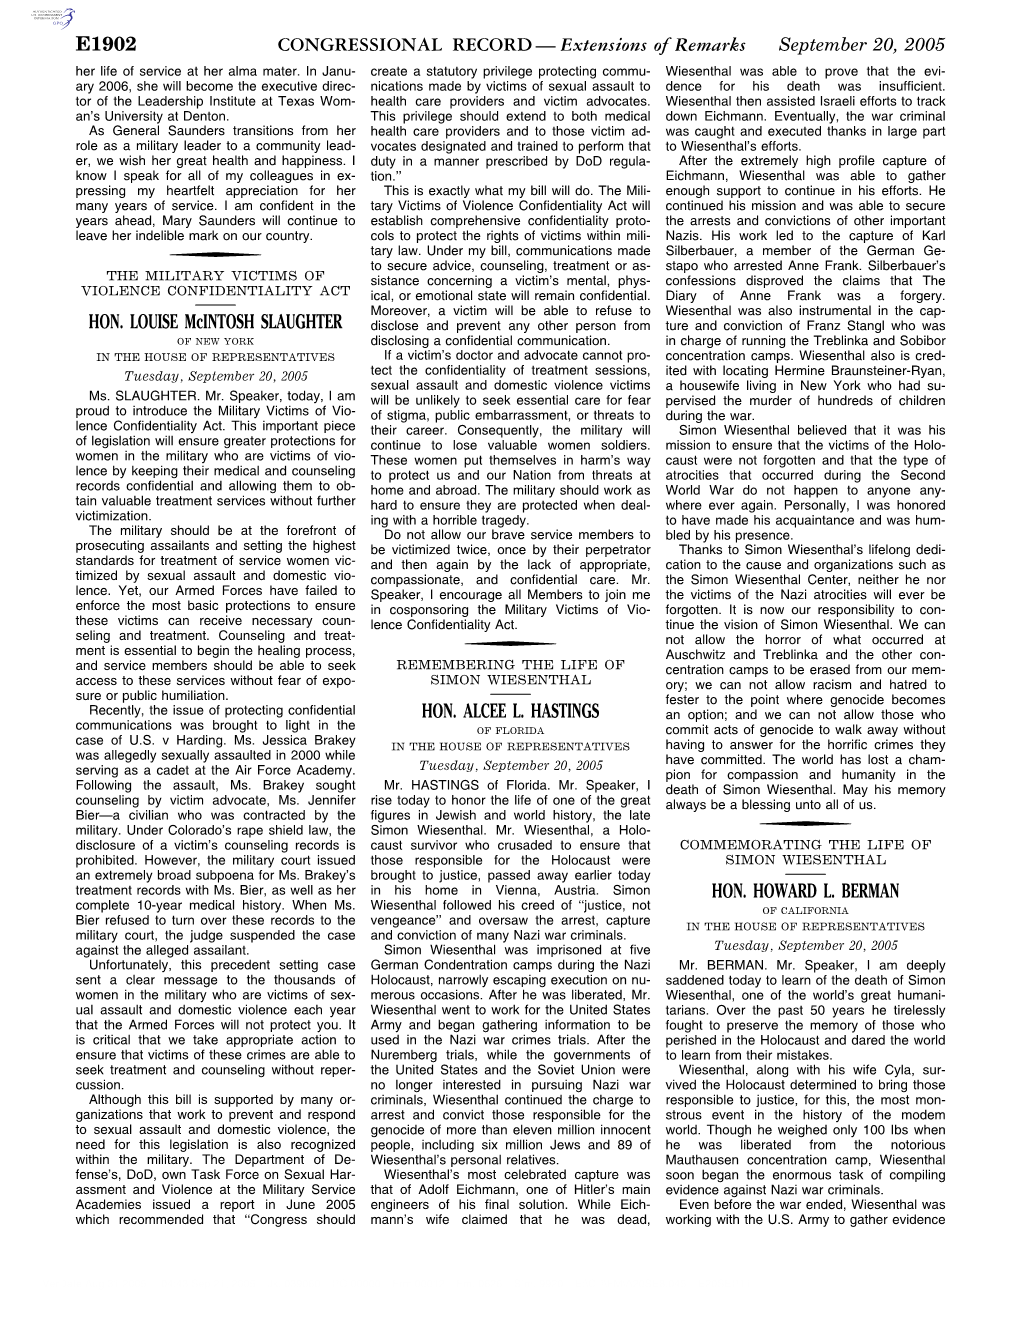 Extensions of Remarks E1902 HON. LOUISE Mcintosh SLAUGHTER